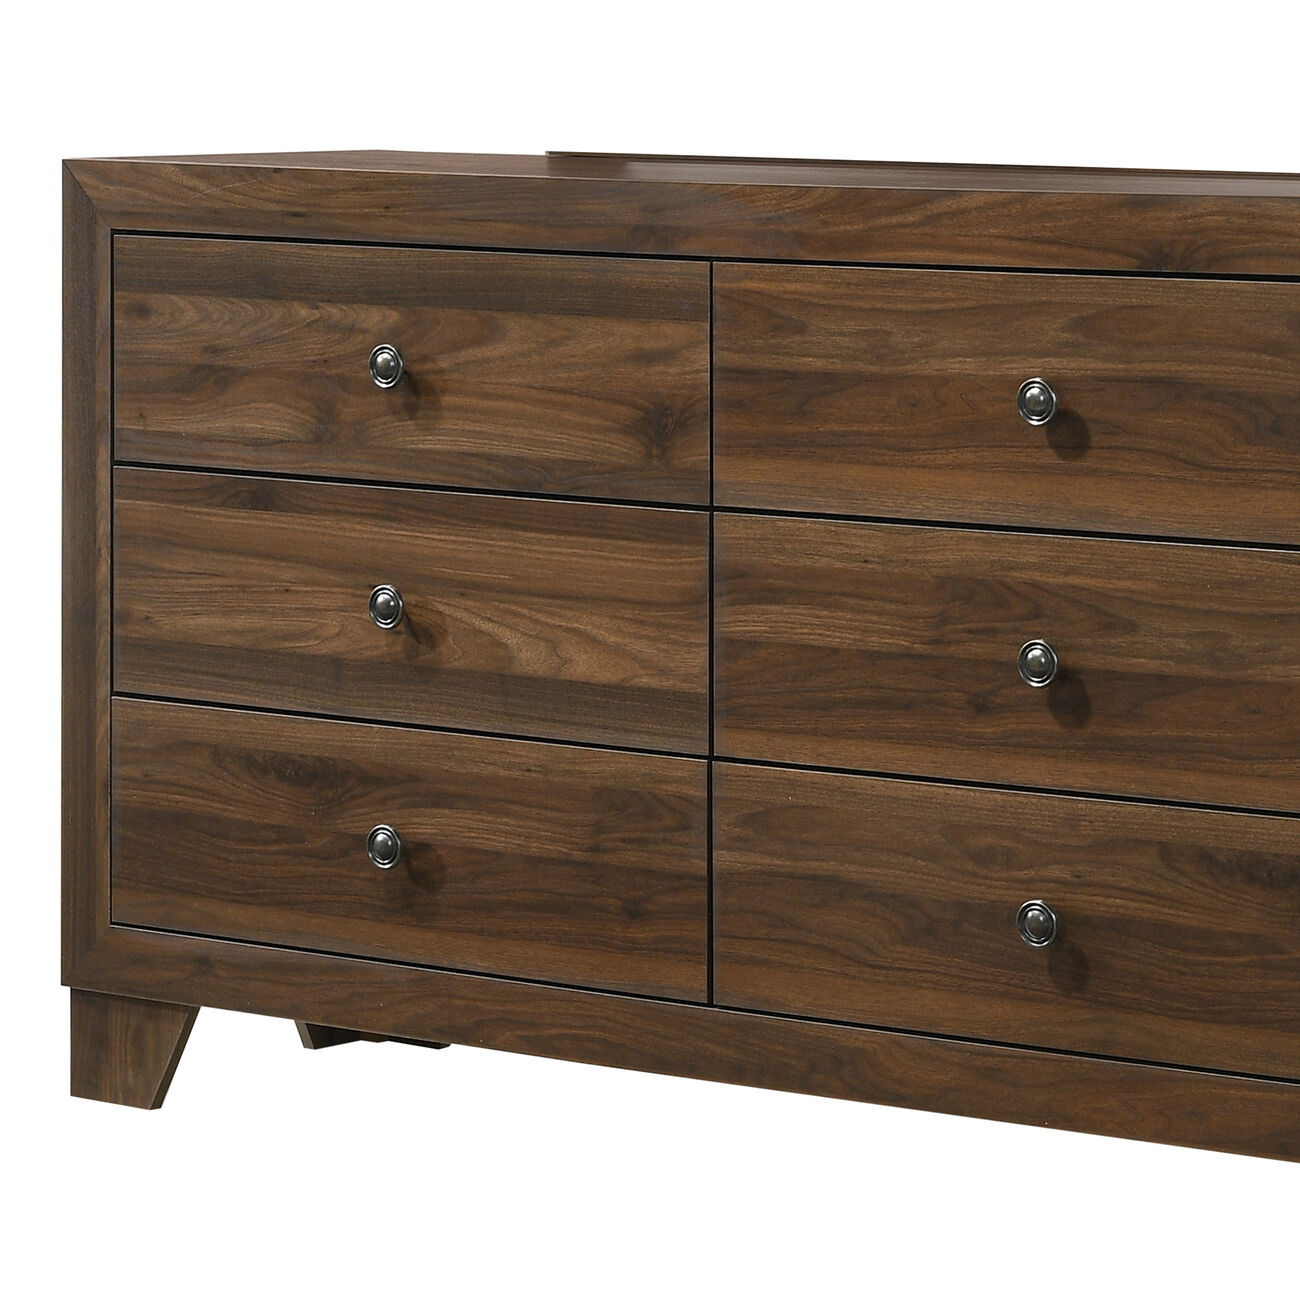 6 Drawer Wooden Dresser with Round Knobs and Tapered Legs, Brown - BM215246